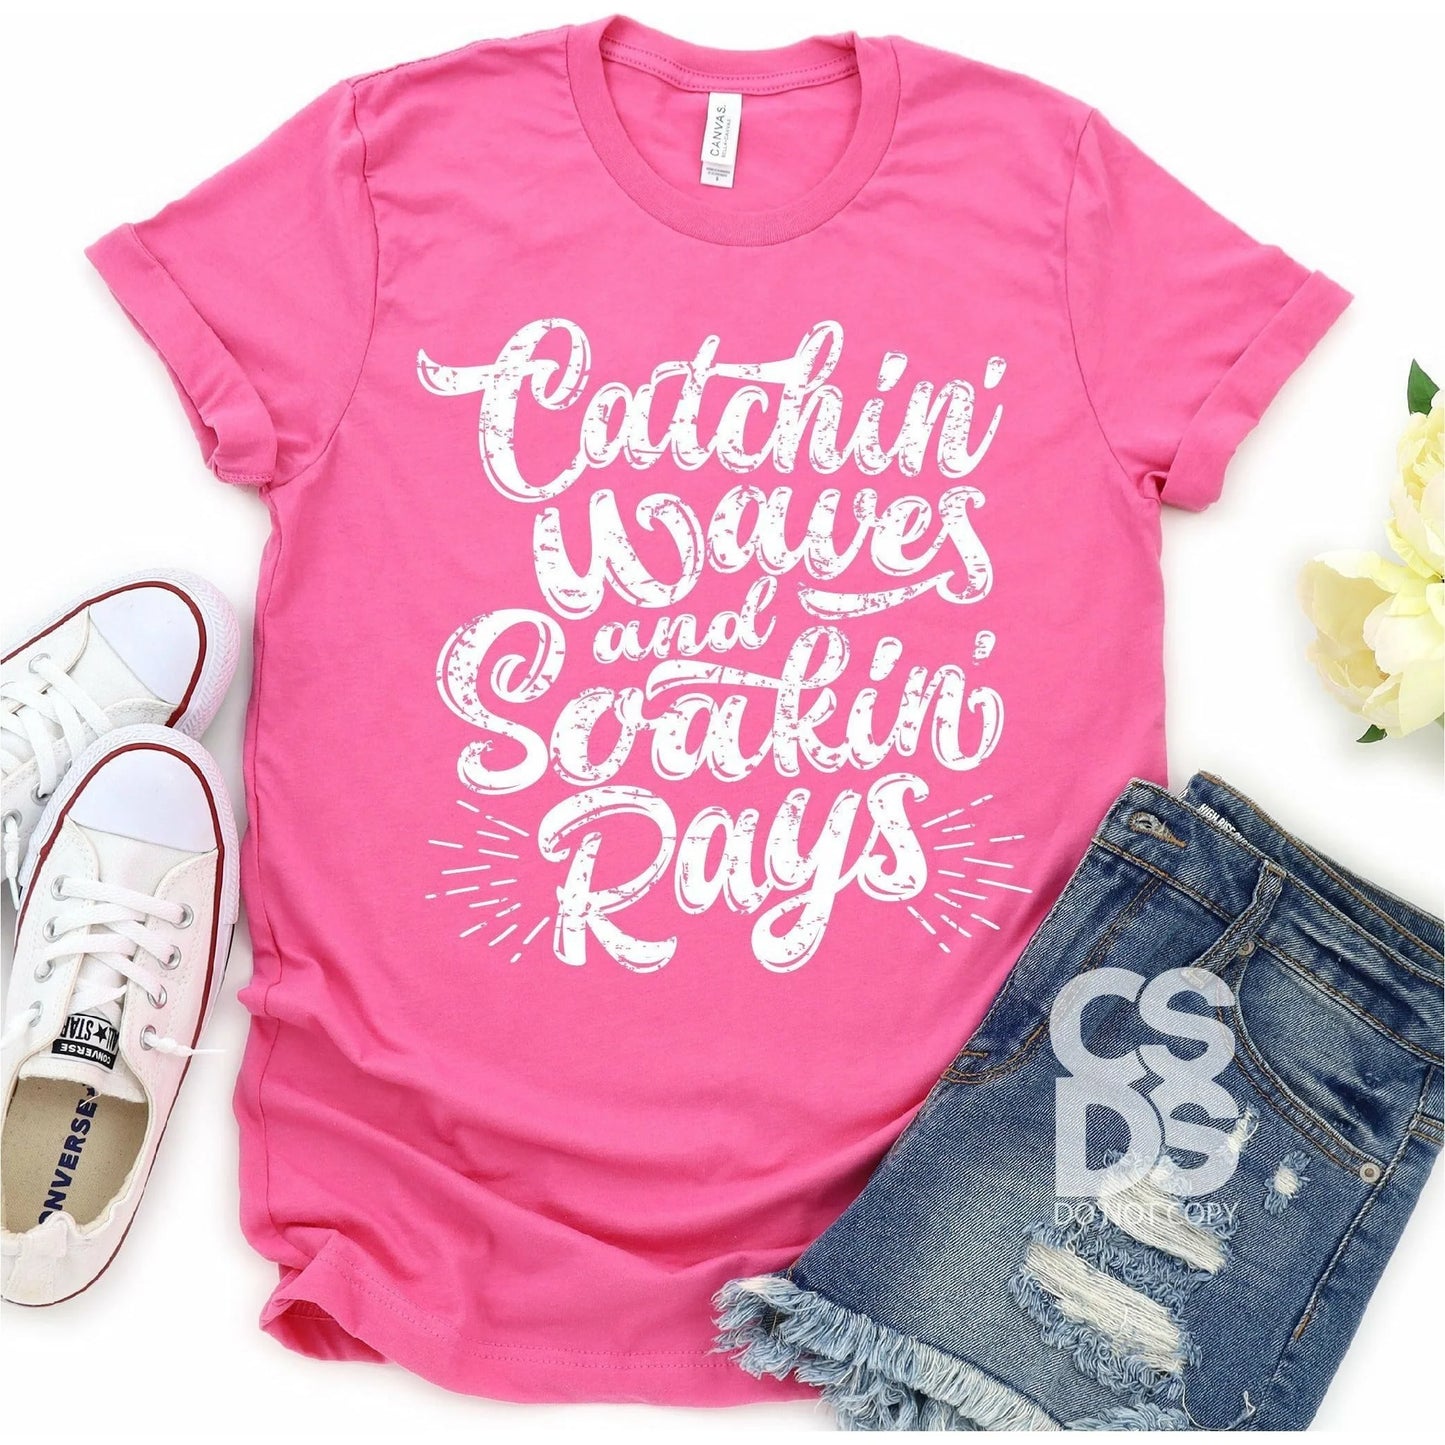 Catchin' Waves and Soakin' Rays - FamFancy Boutique